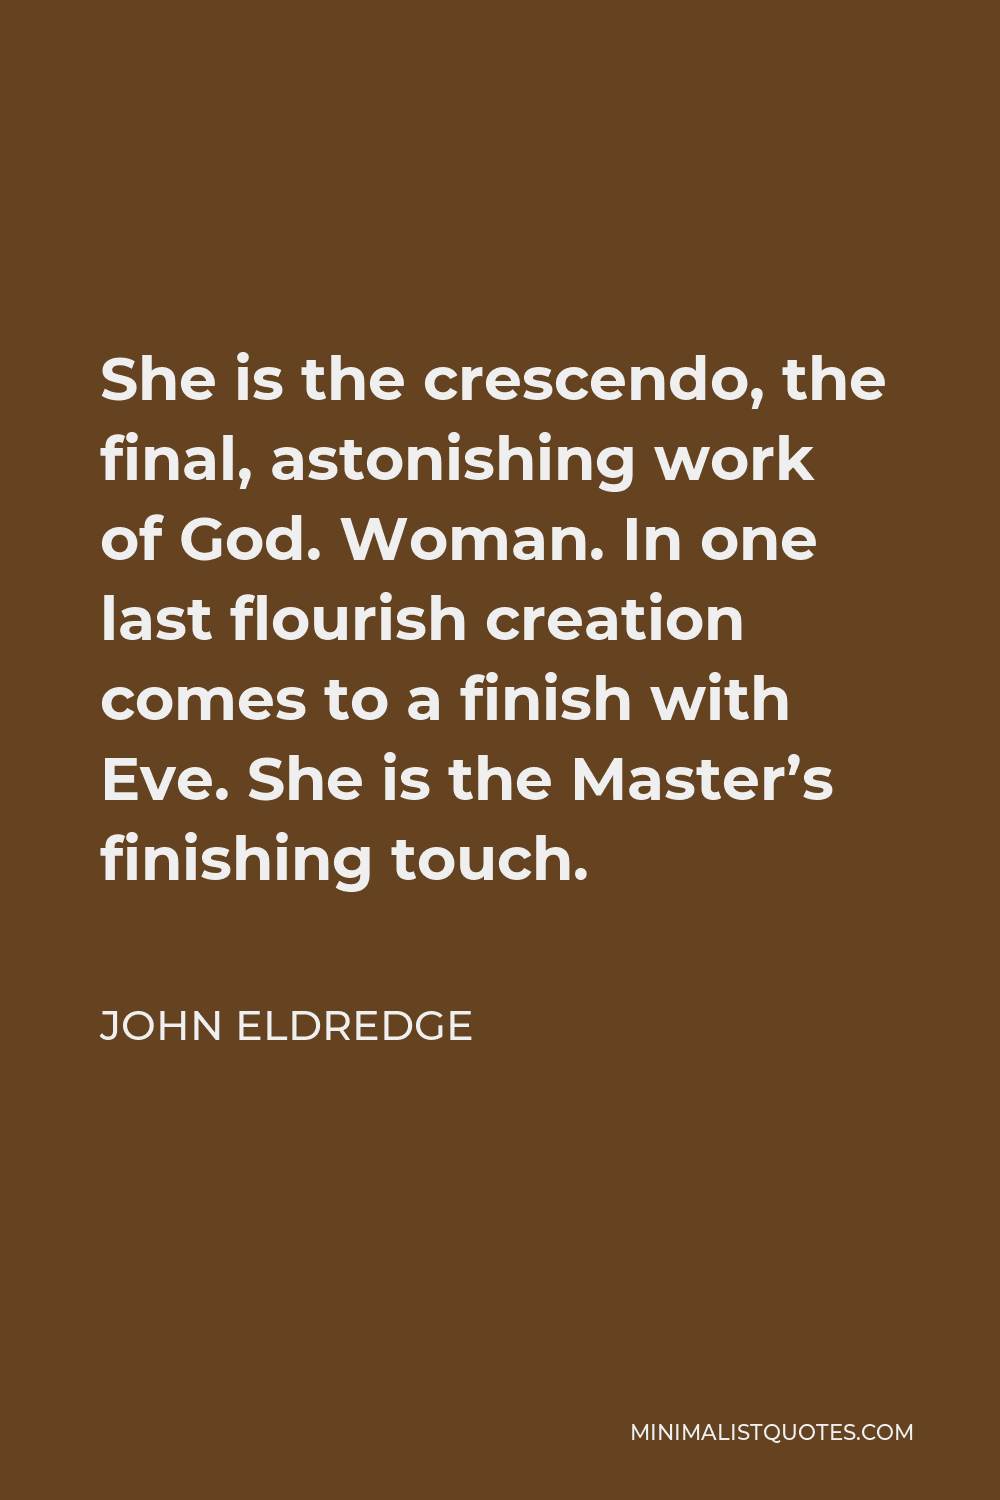 John Eldredge Quote - She is the crescendo, the final, astonishing work of God. Woman. In one last flourish creation comes to a finish with Eve. She is the Master’s finishing touch.